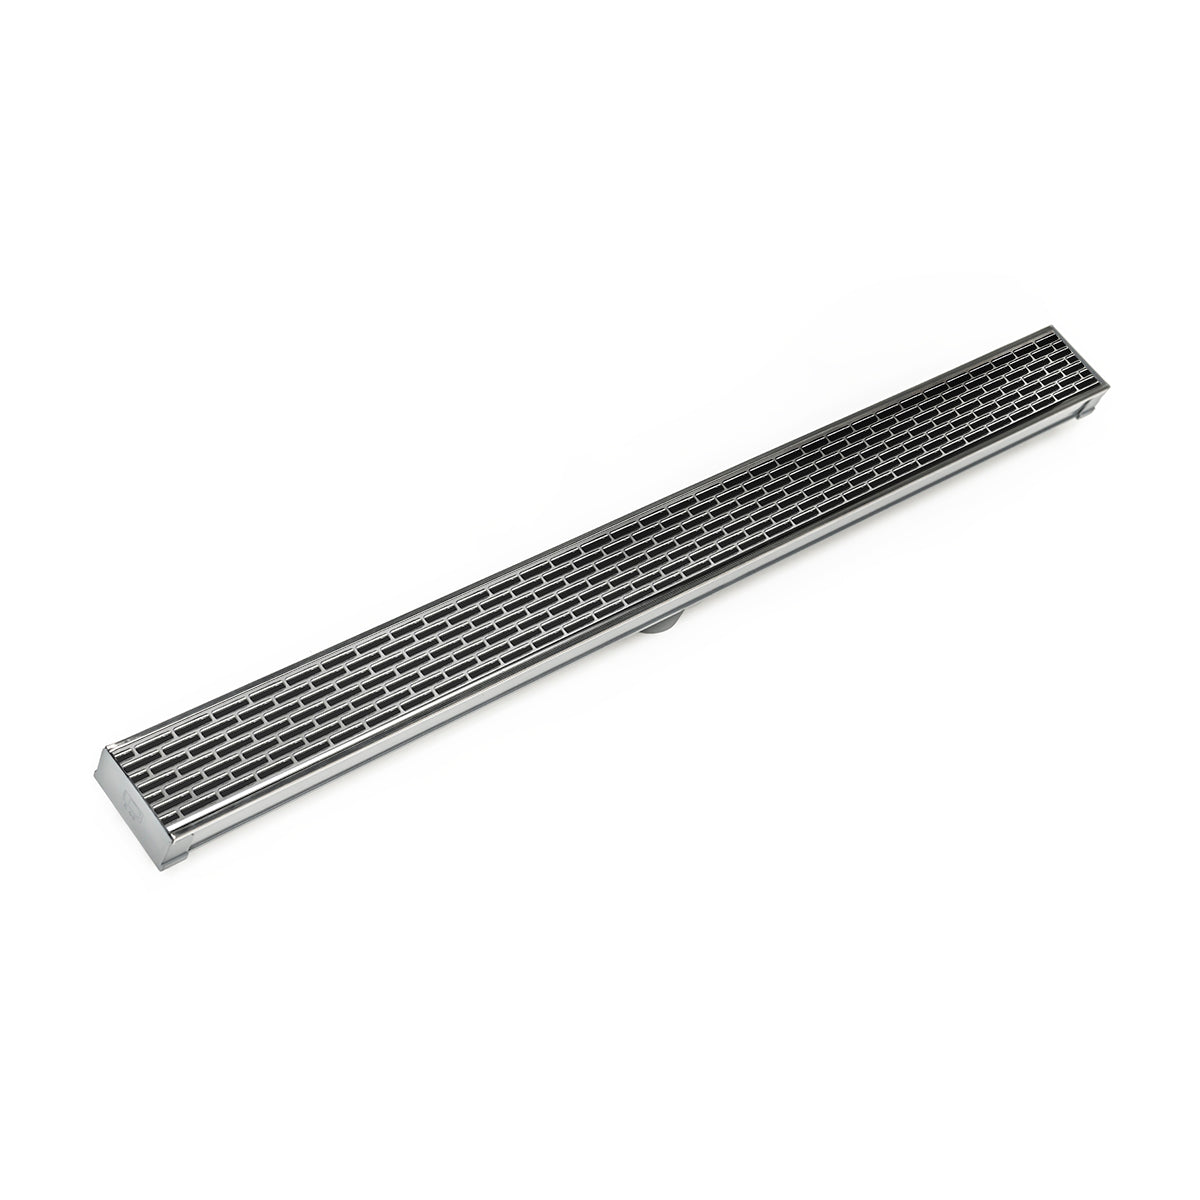 Infinity Drain 72" S-PVC Series Low Profile Site Sizable Linear Drain Kit with 2 1/2" Perforated Offset Slot Grate